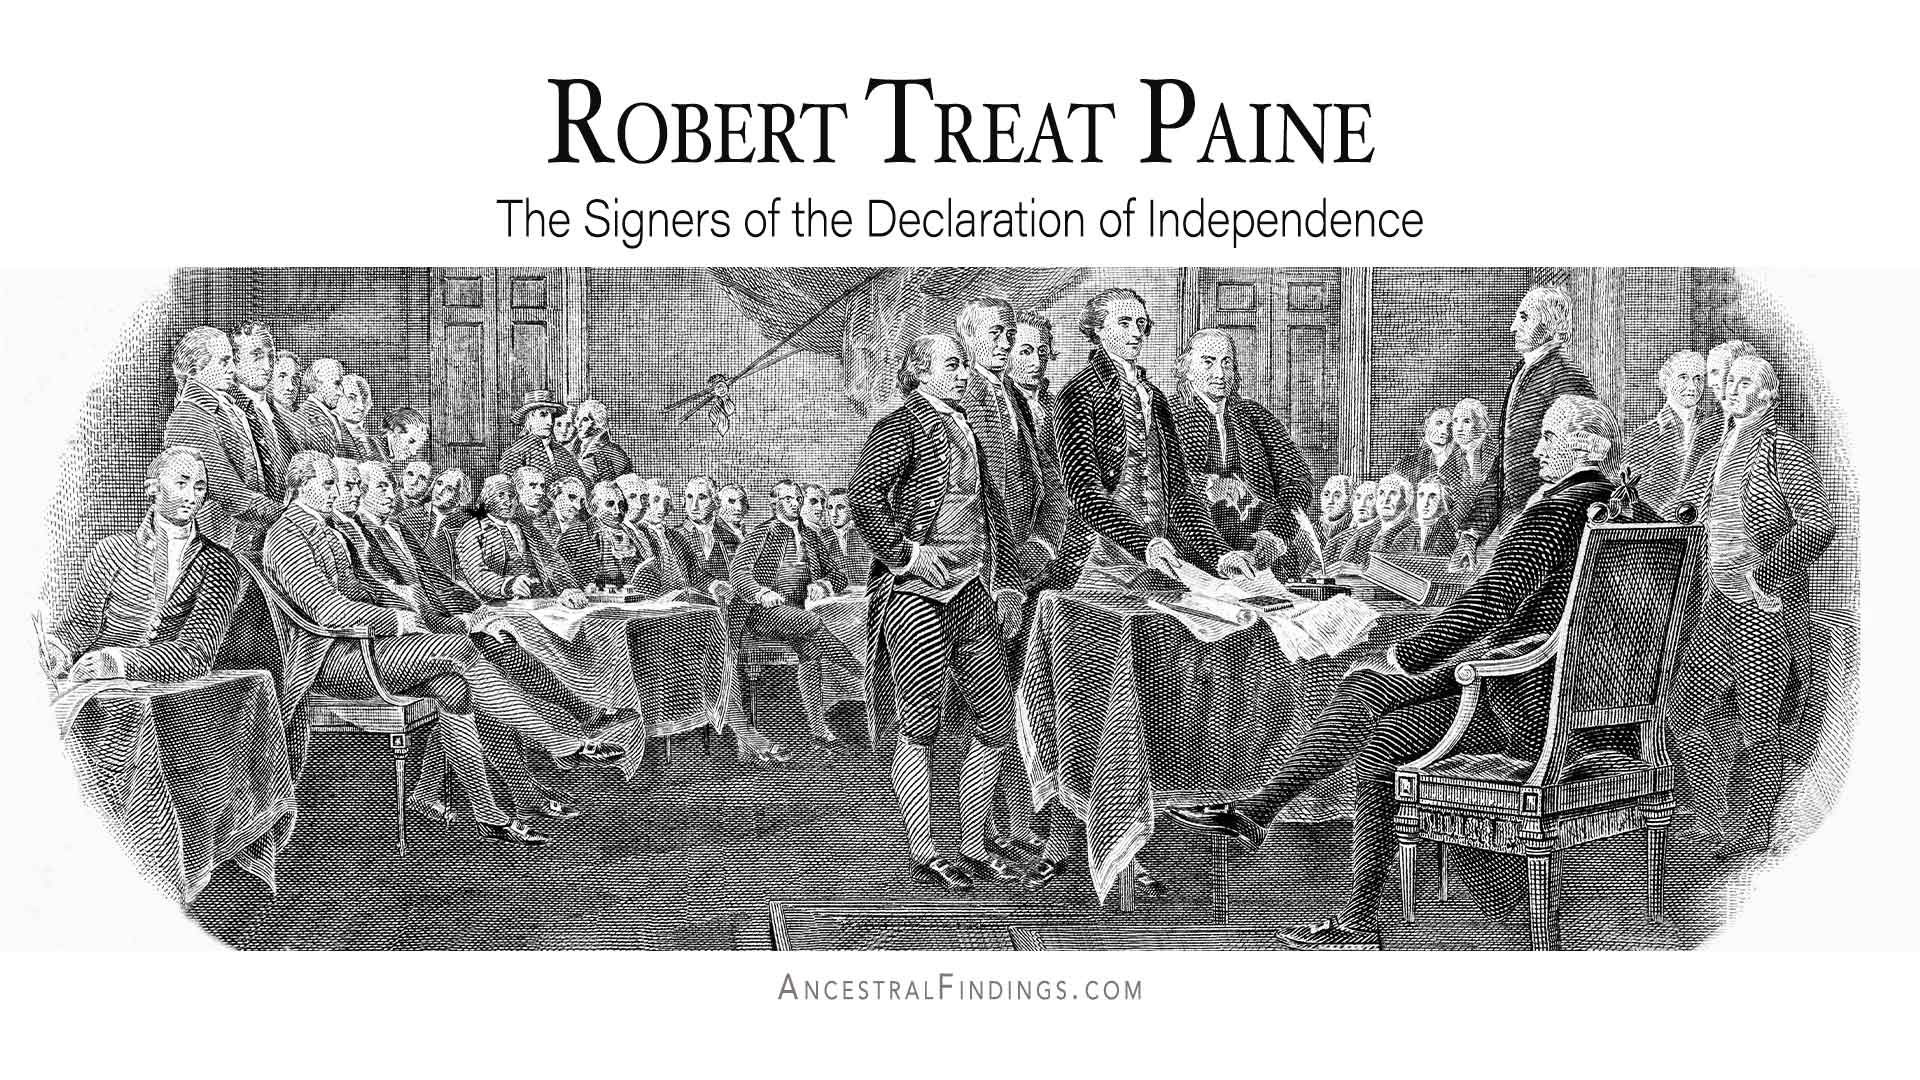 Robert Treat Paine: The Signers of the Declaration of Independence